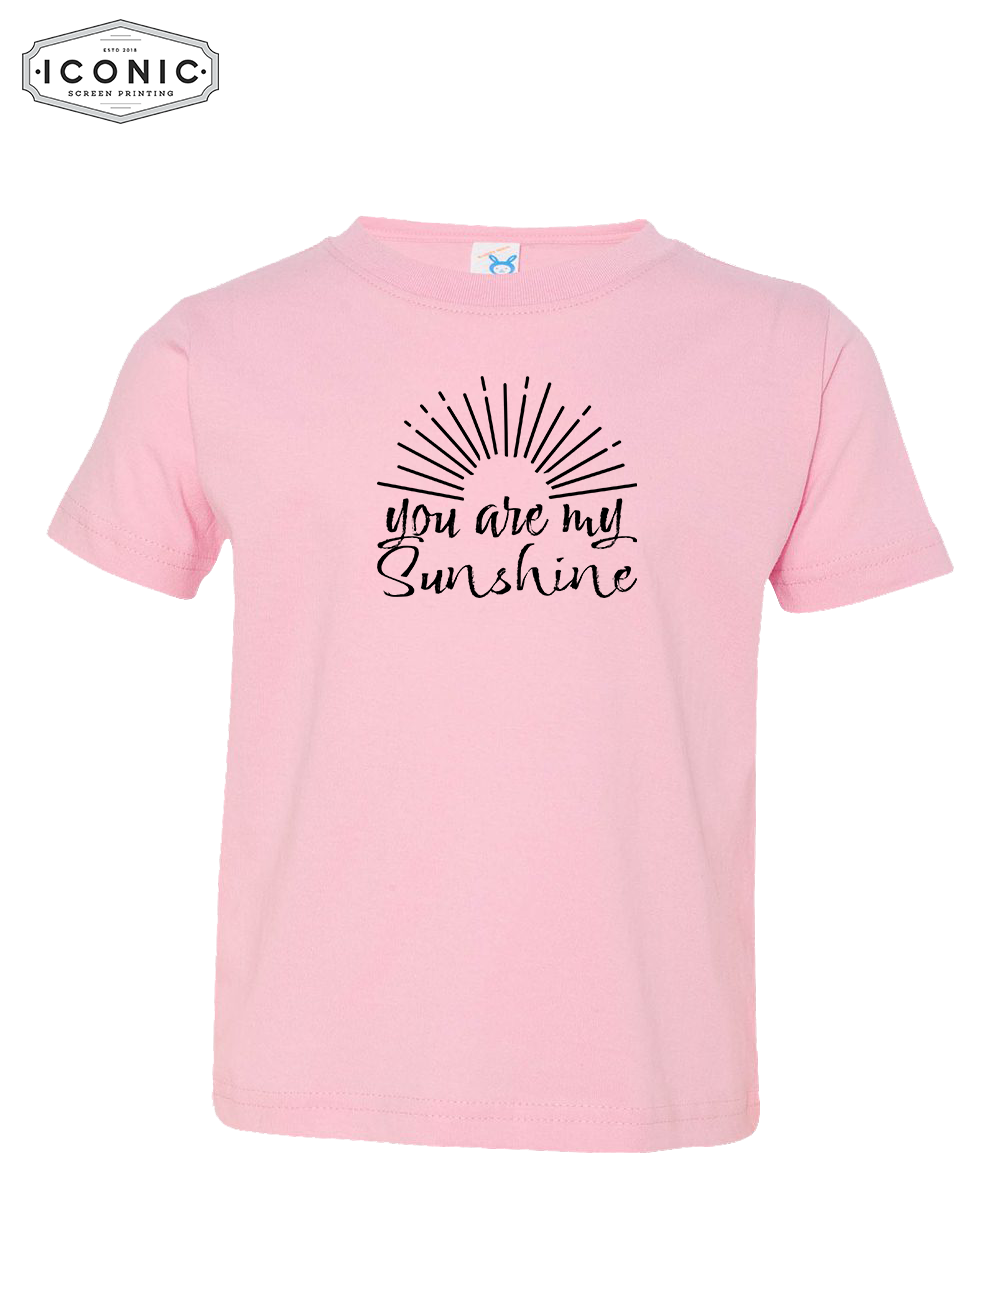 You Are My Sunshine - Toddler Fine Jersey Tee